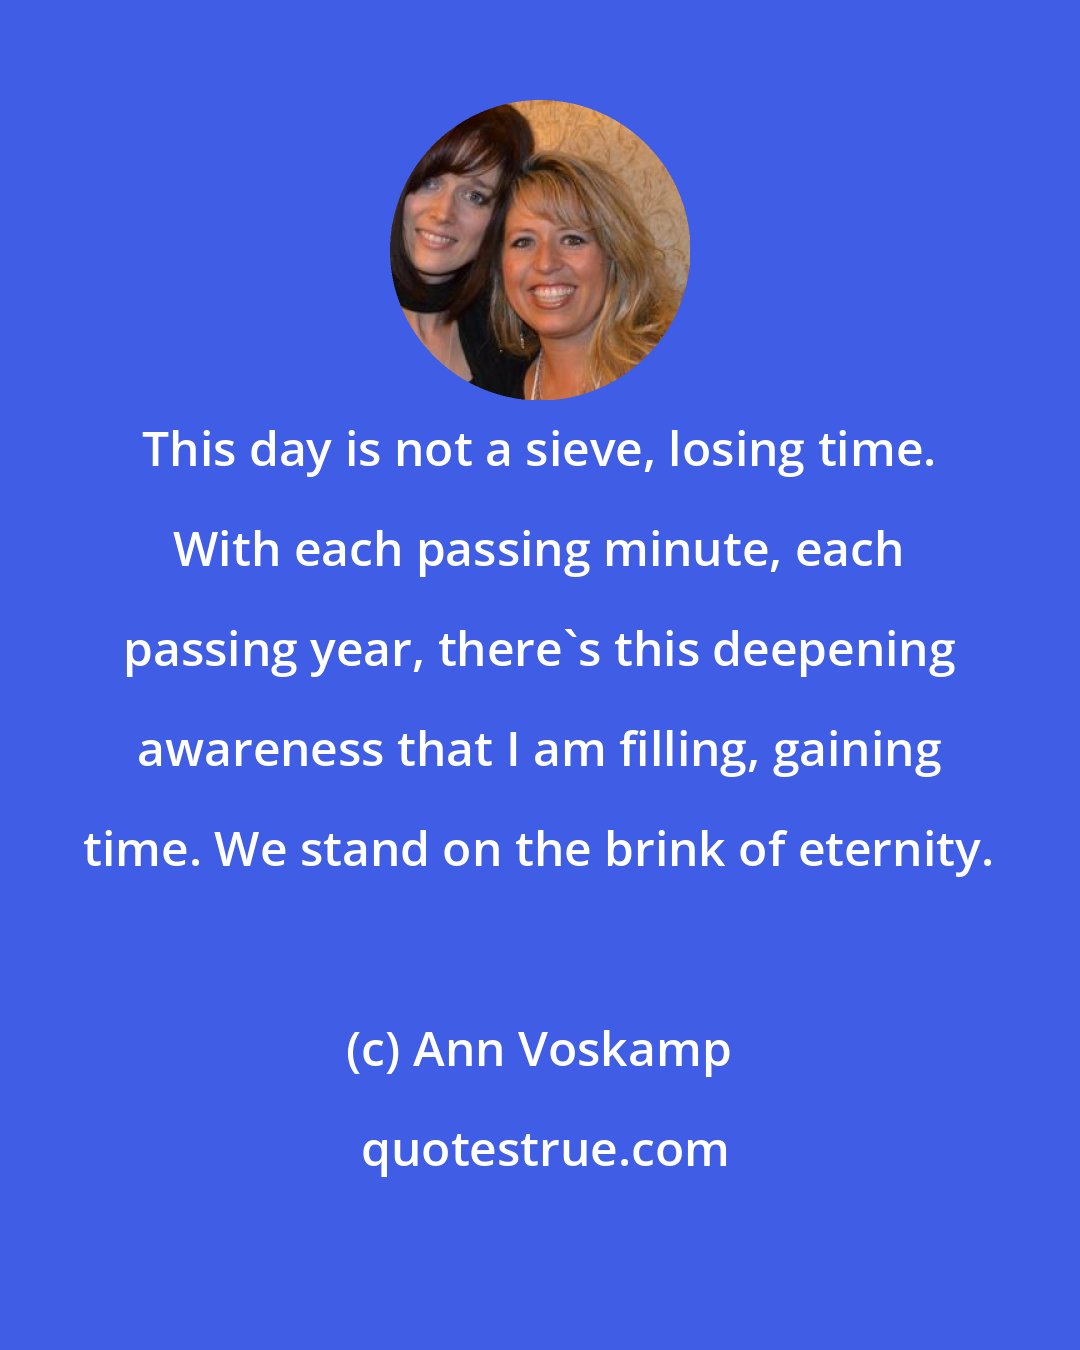 Ann Voskamp: This day is not a sieve, losing time. With each passing minute, each passing year, there's this deepening awareness that I am filling, gaining time. We stand on the brink of eternity.